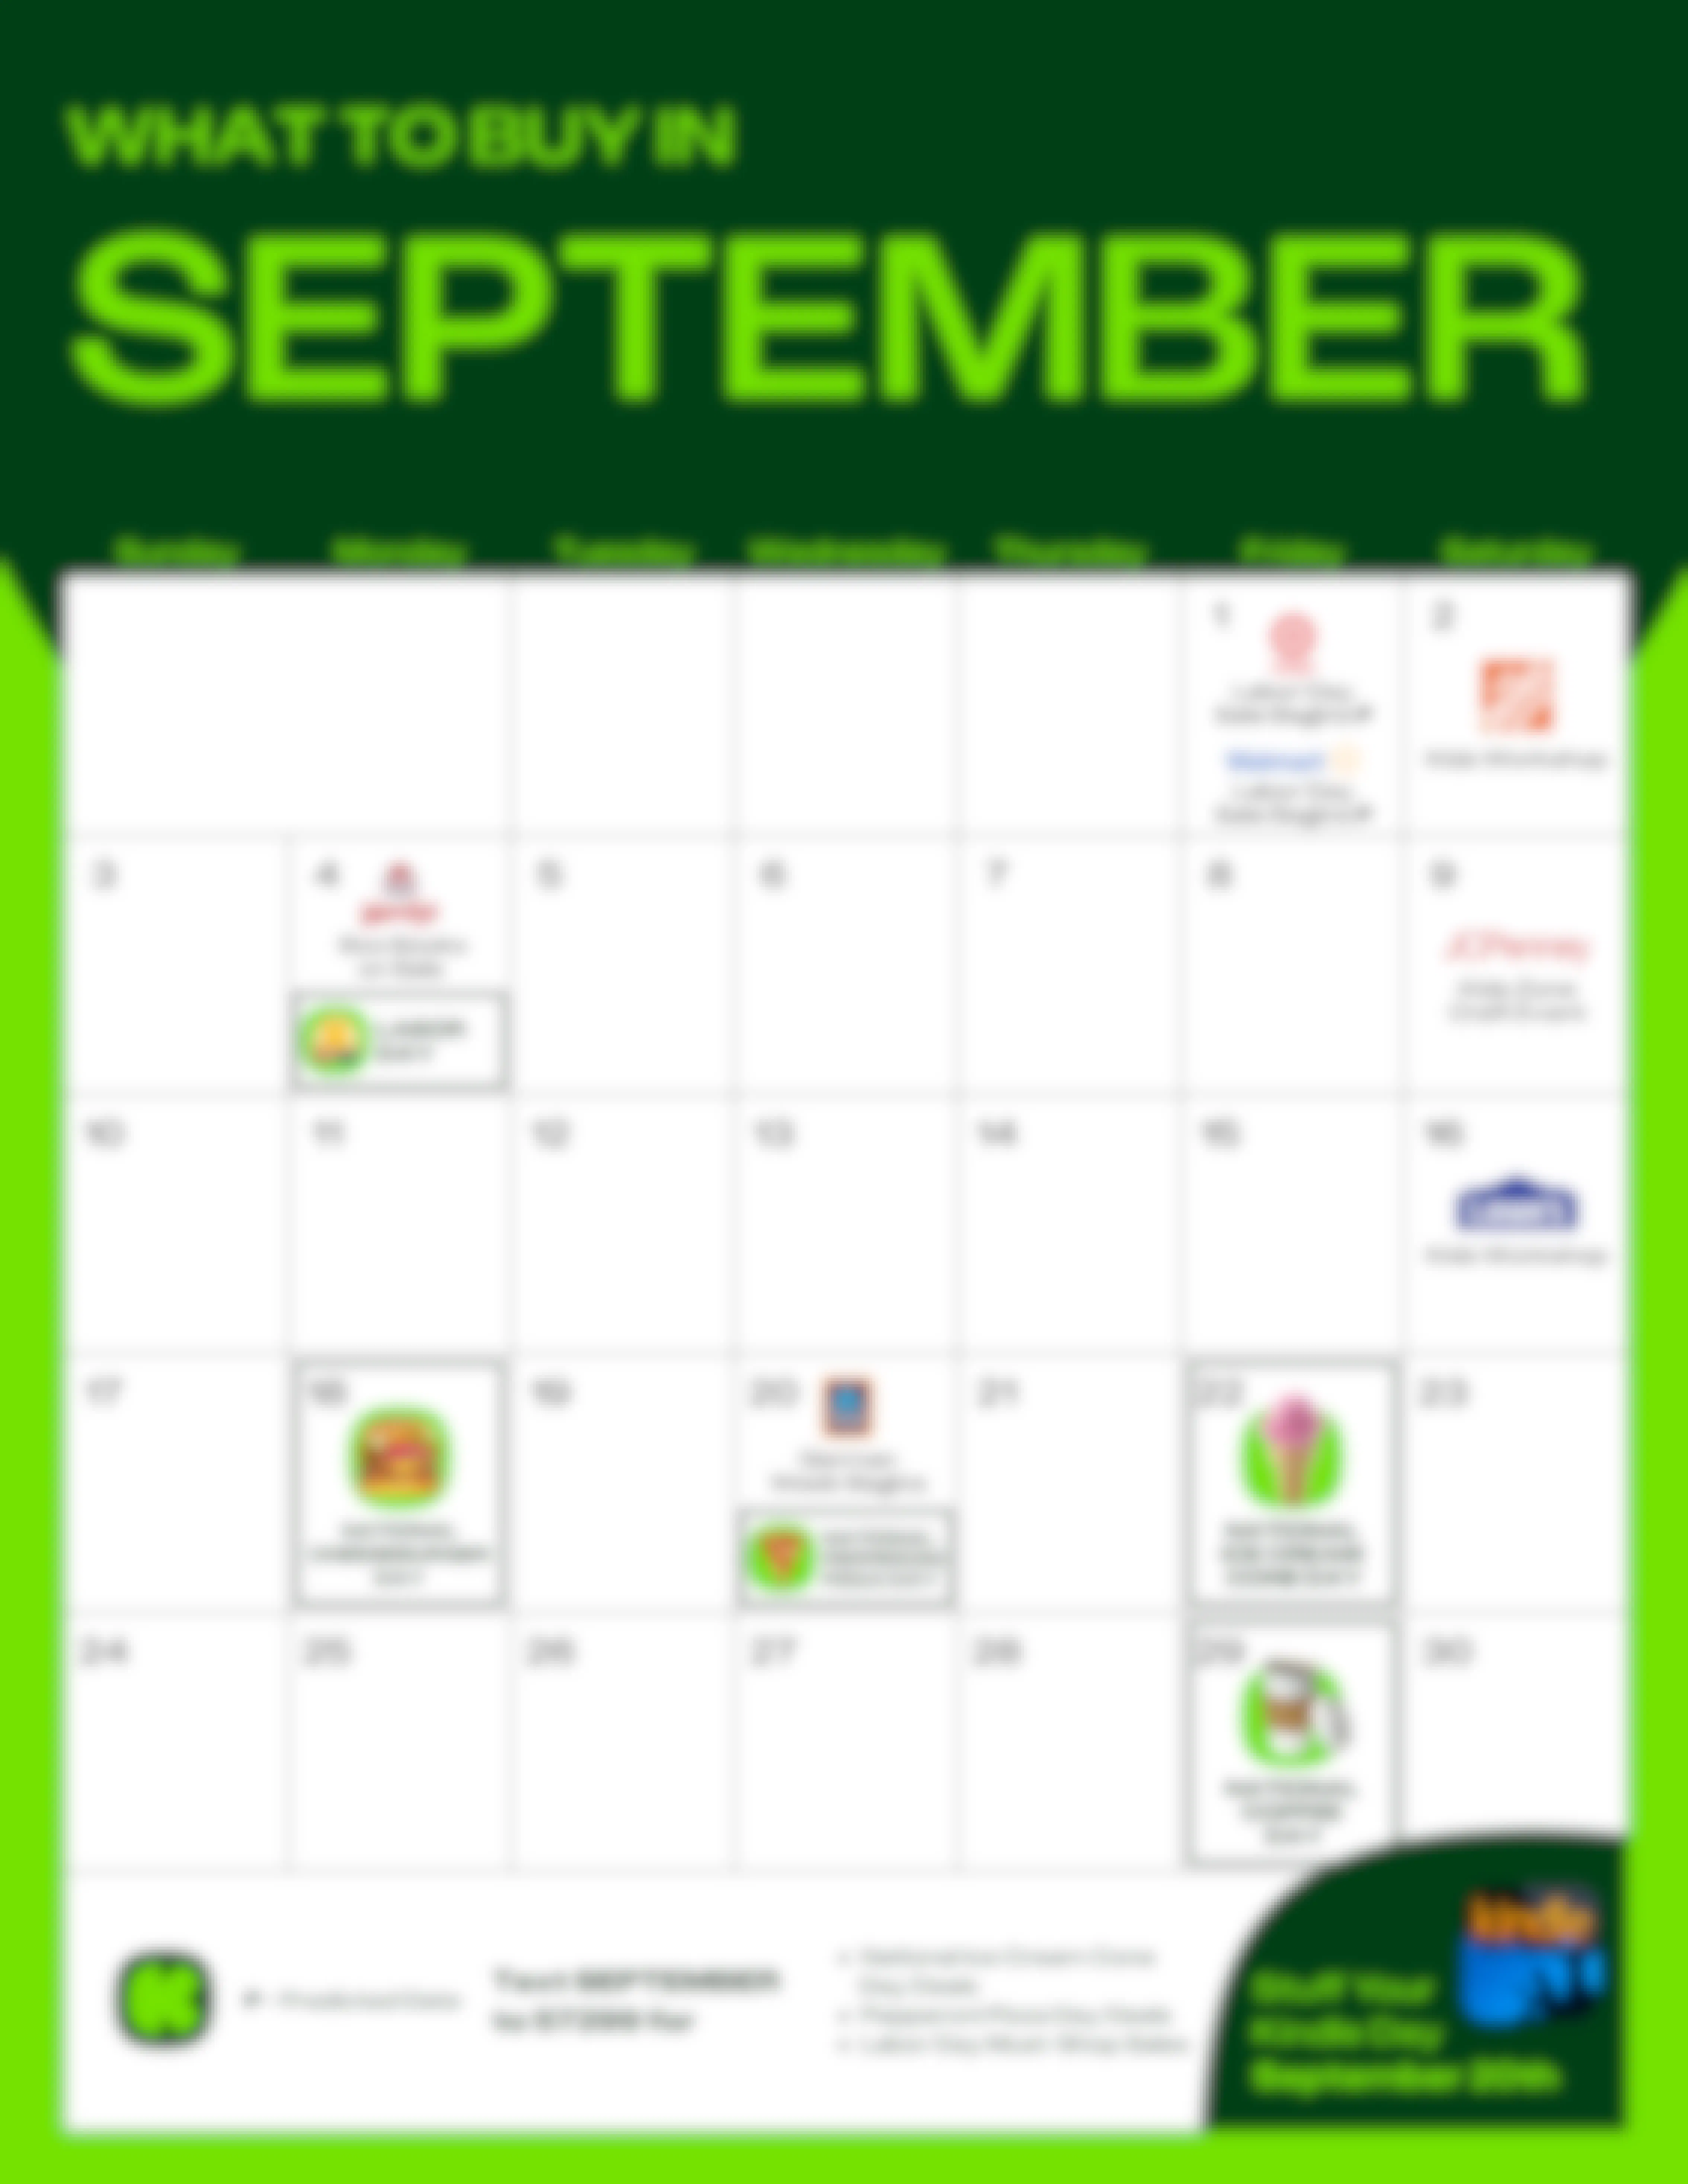 a calendar of shopping dates and sales in September in September